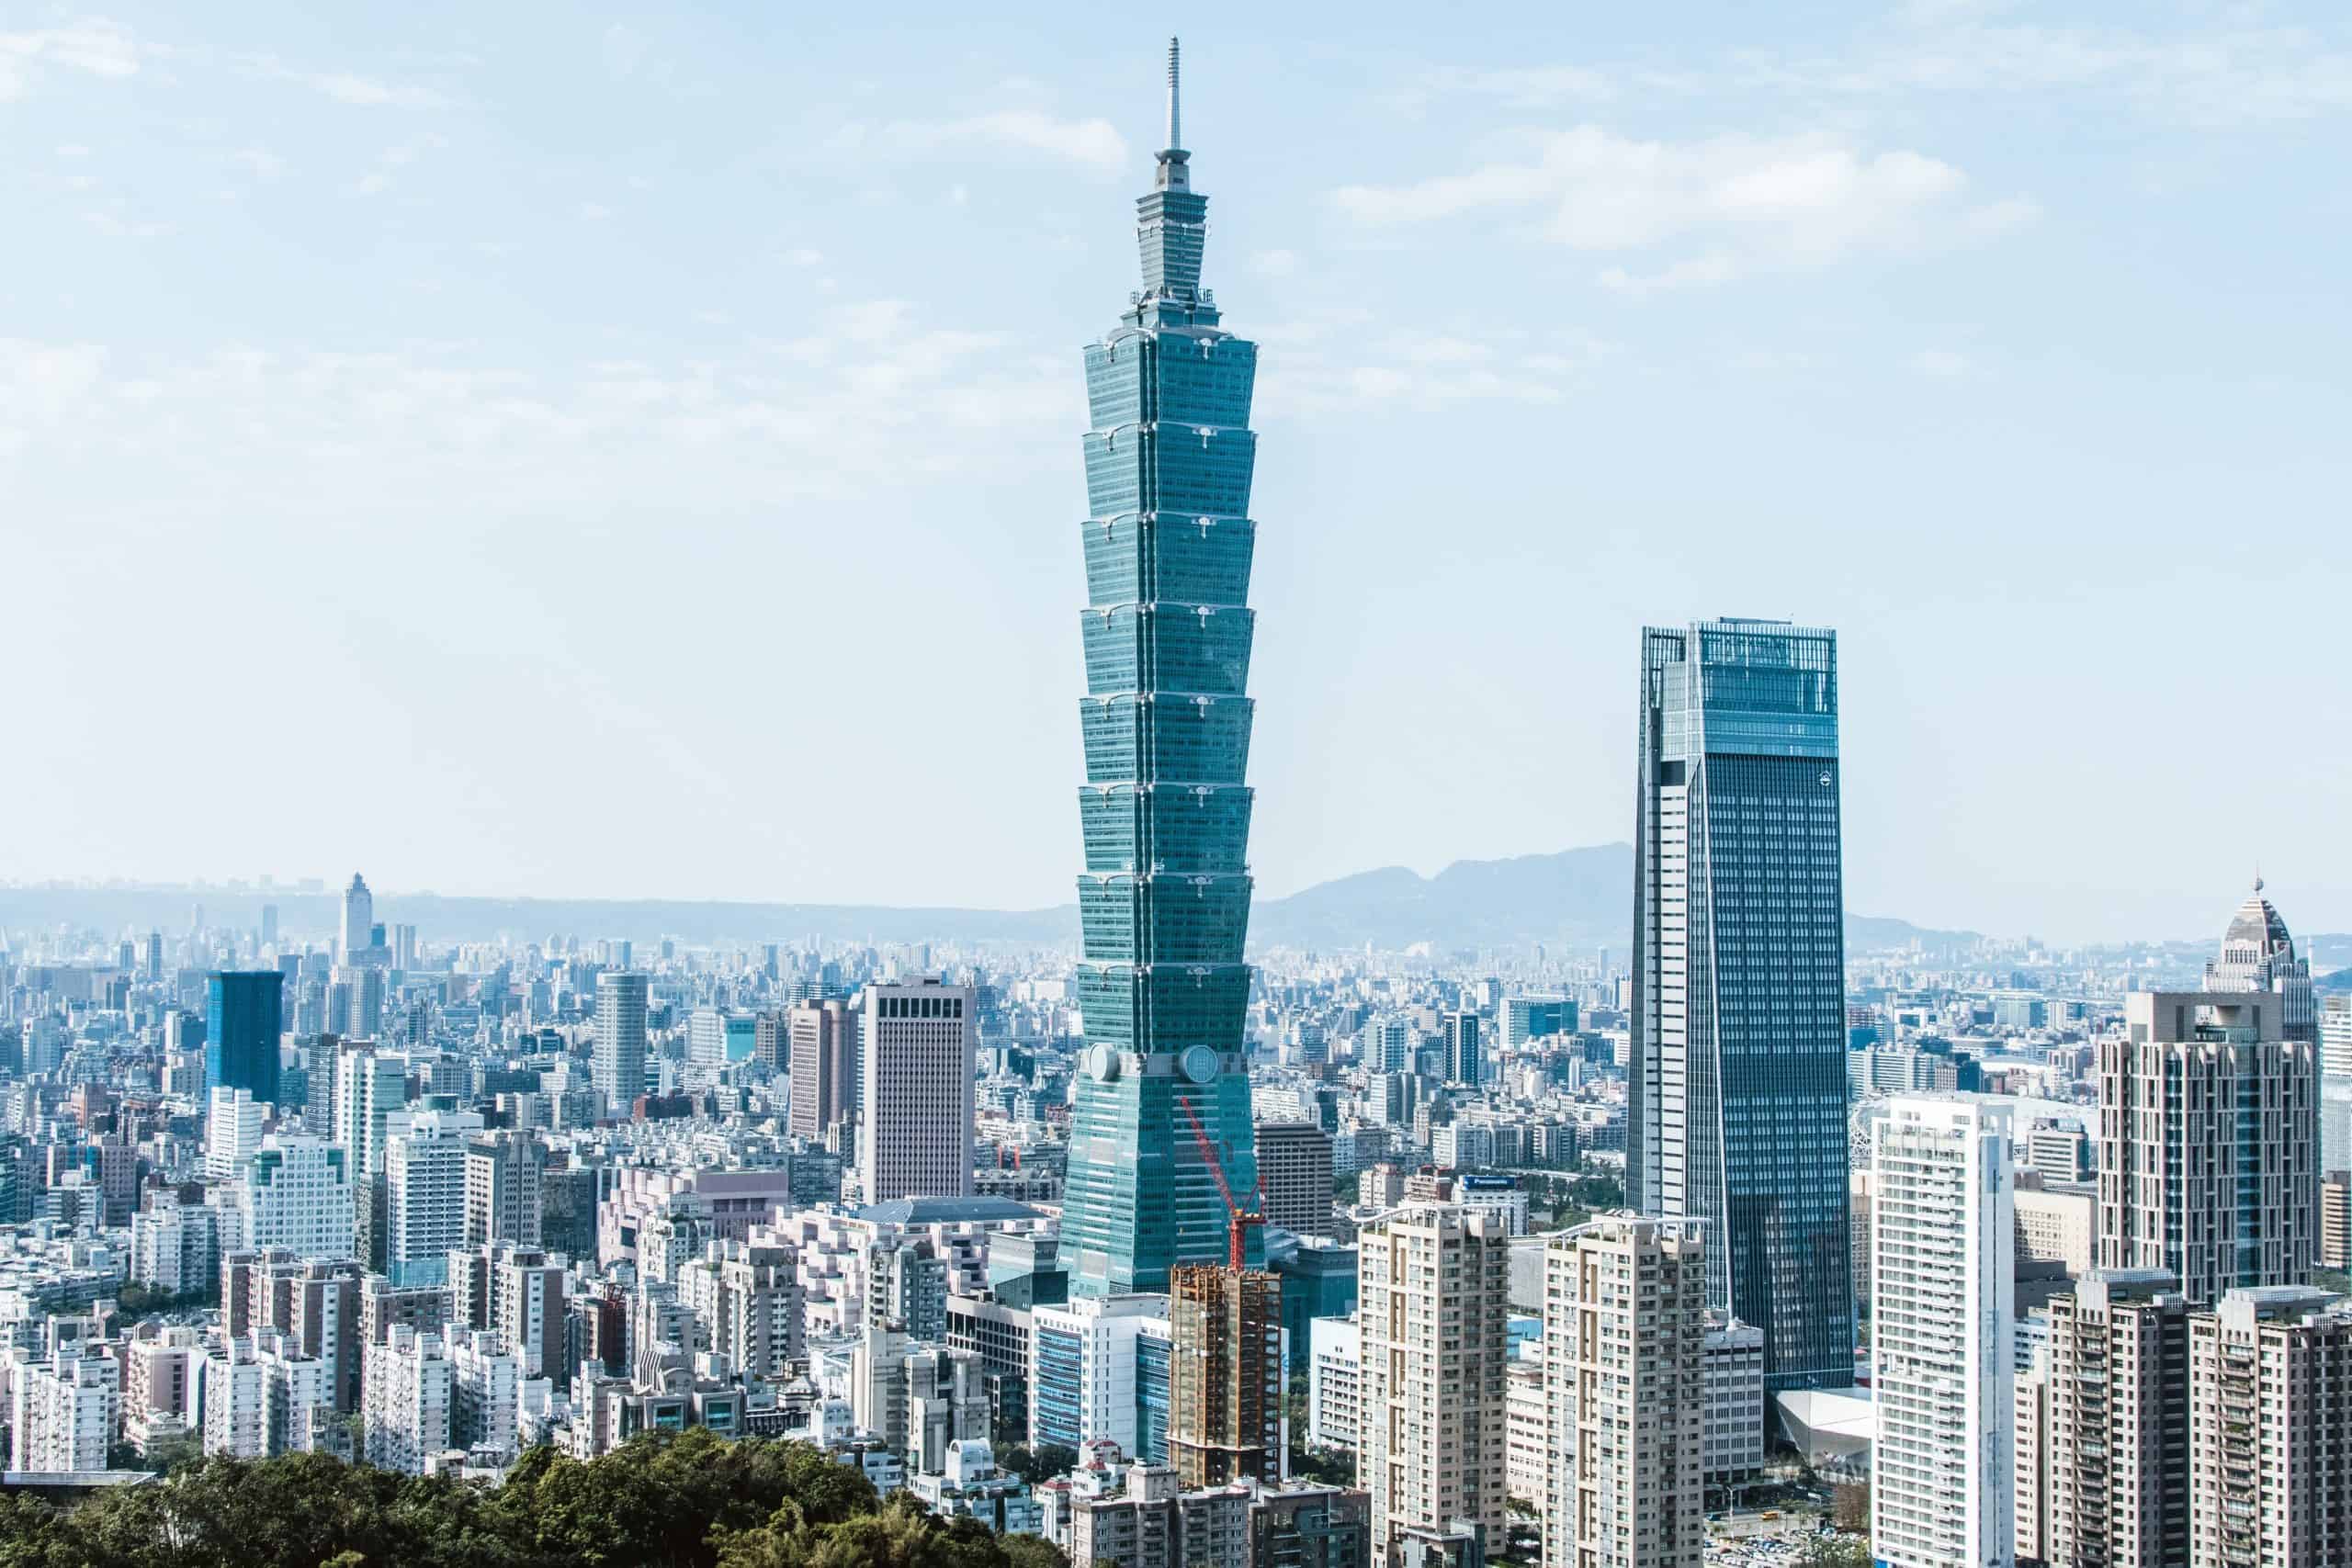 Taiwan has avoided lockdown and has the fastest economic growth in Asia